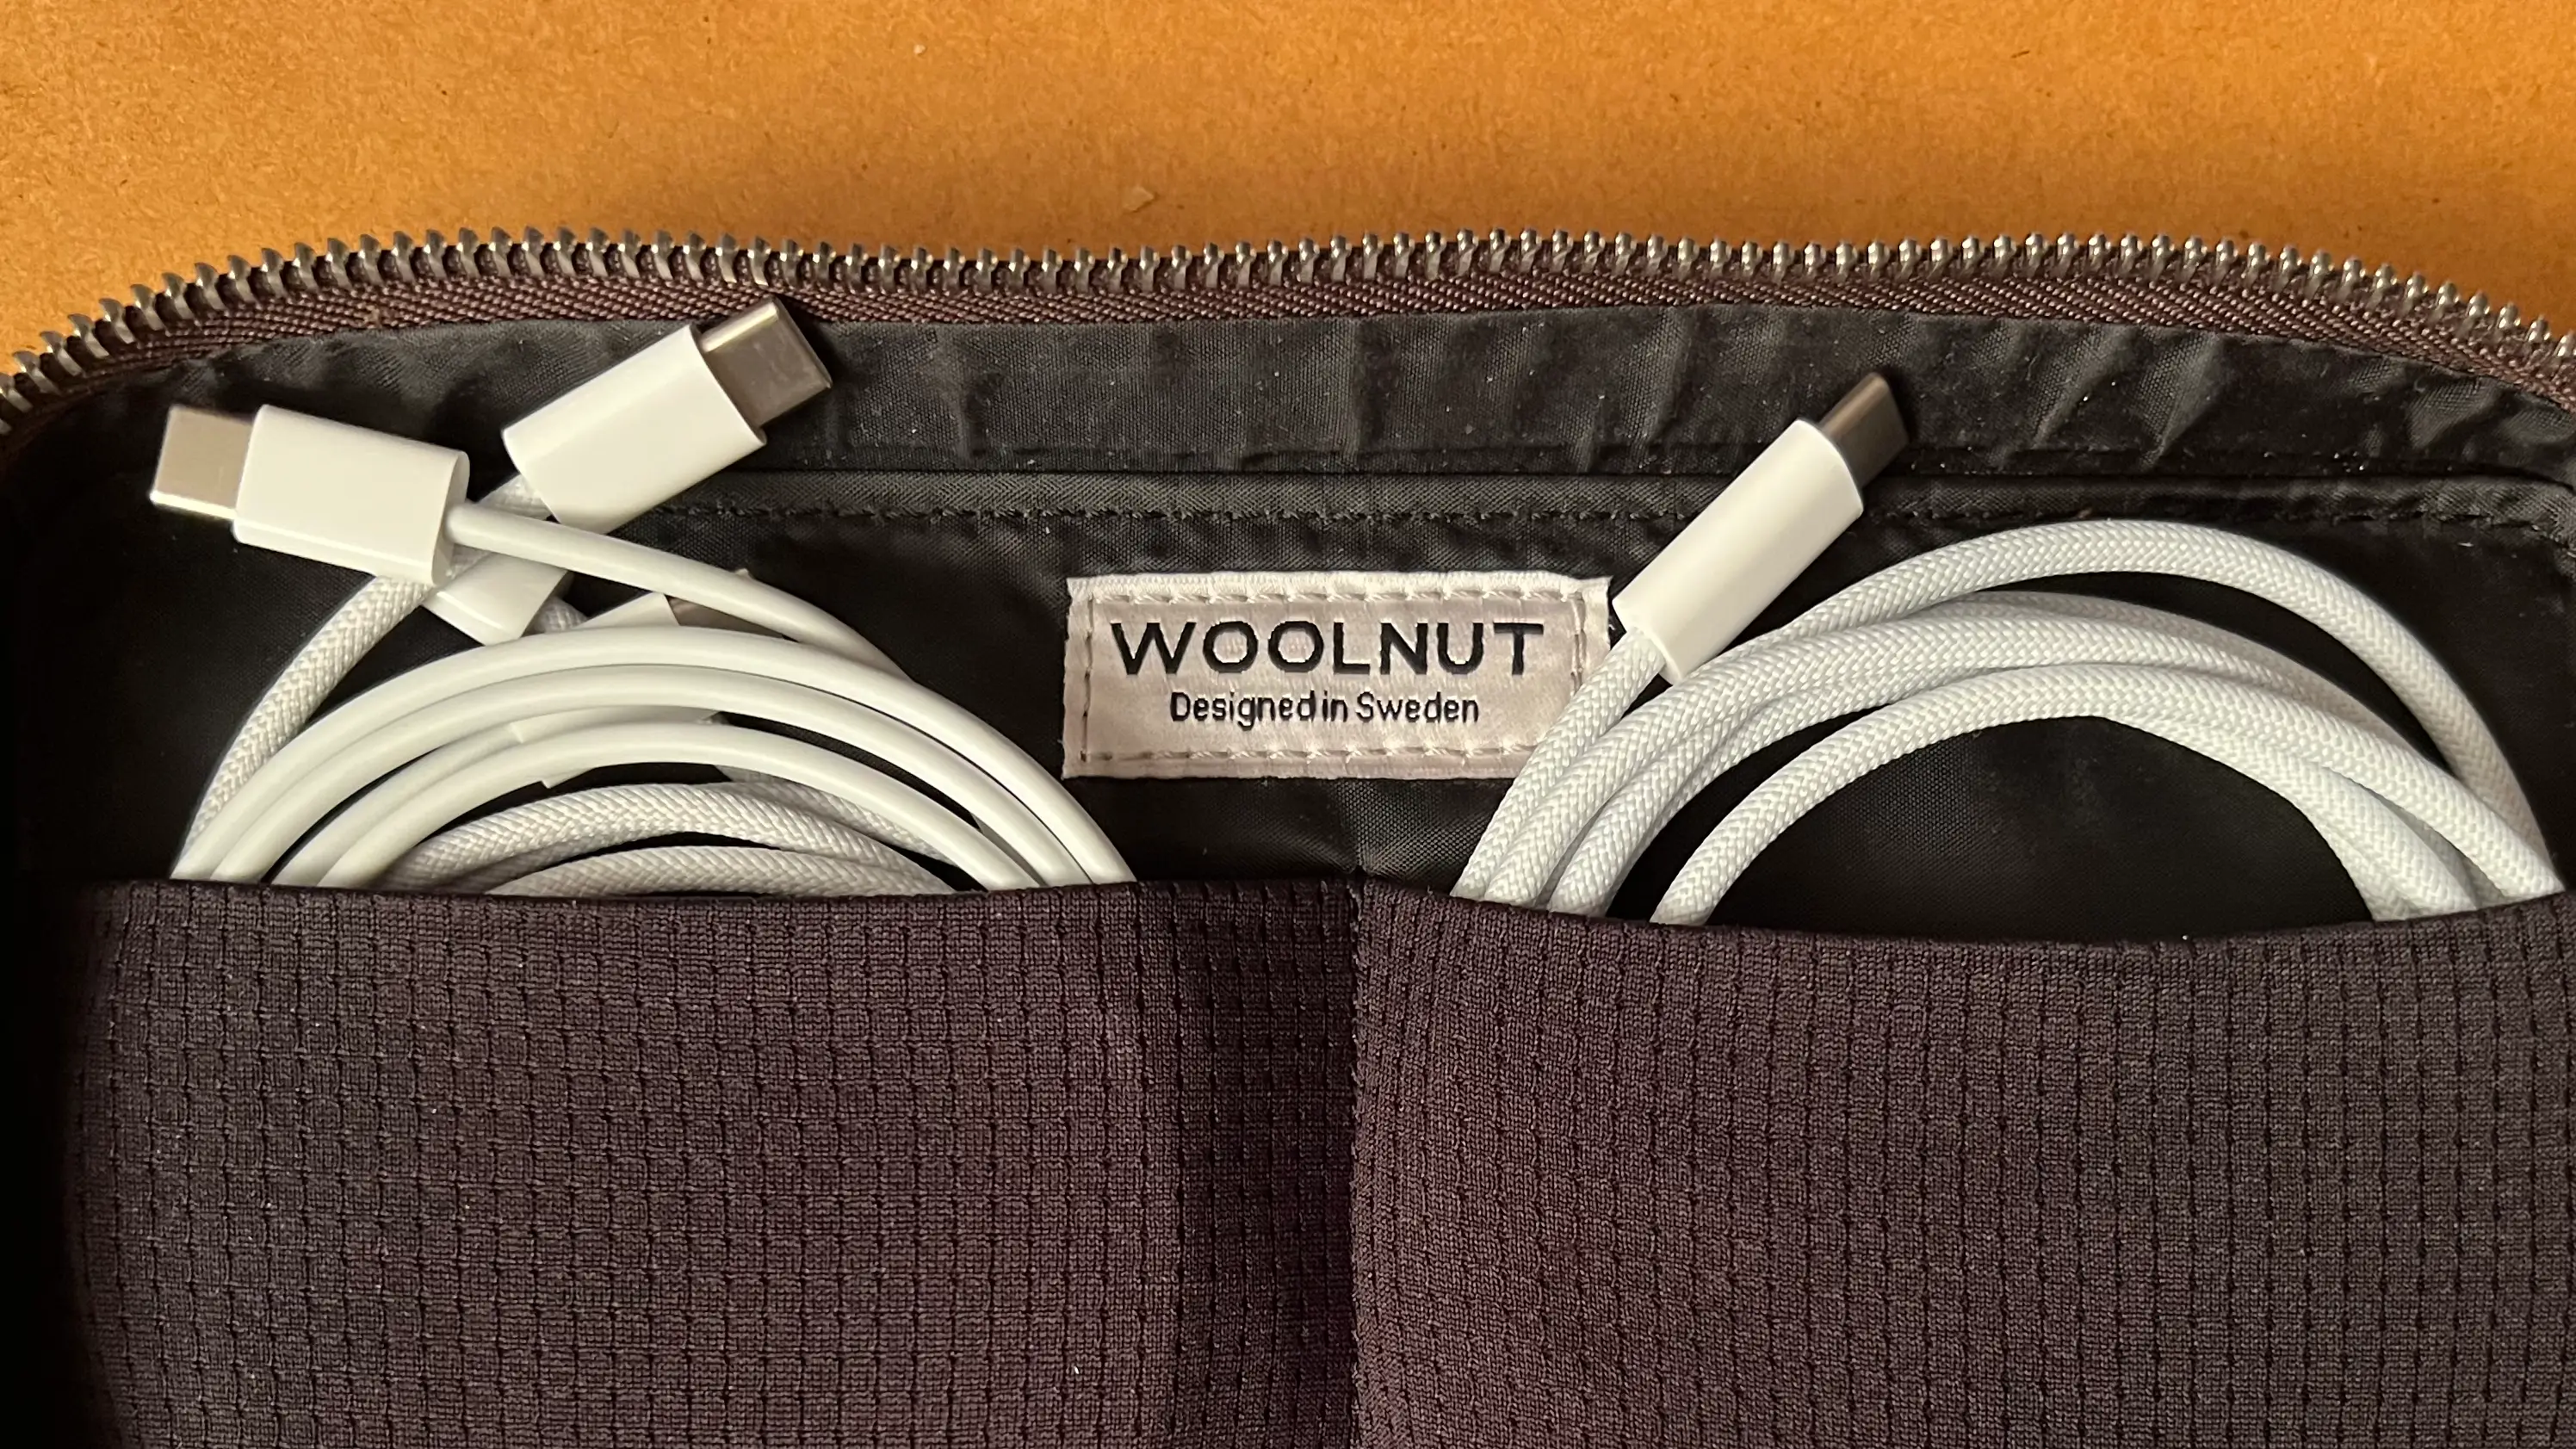 Woolnut Leather Tech Organizer open with USB cables stored in two separate pockets